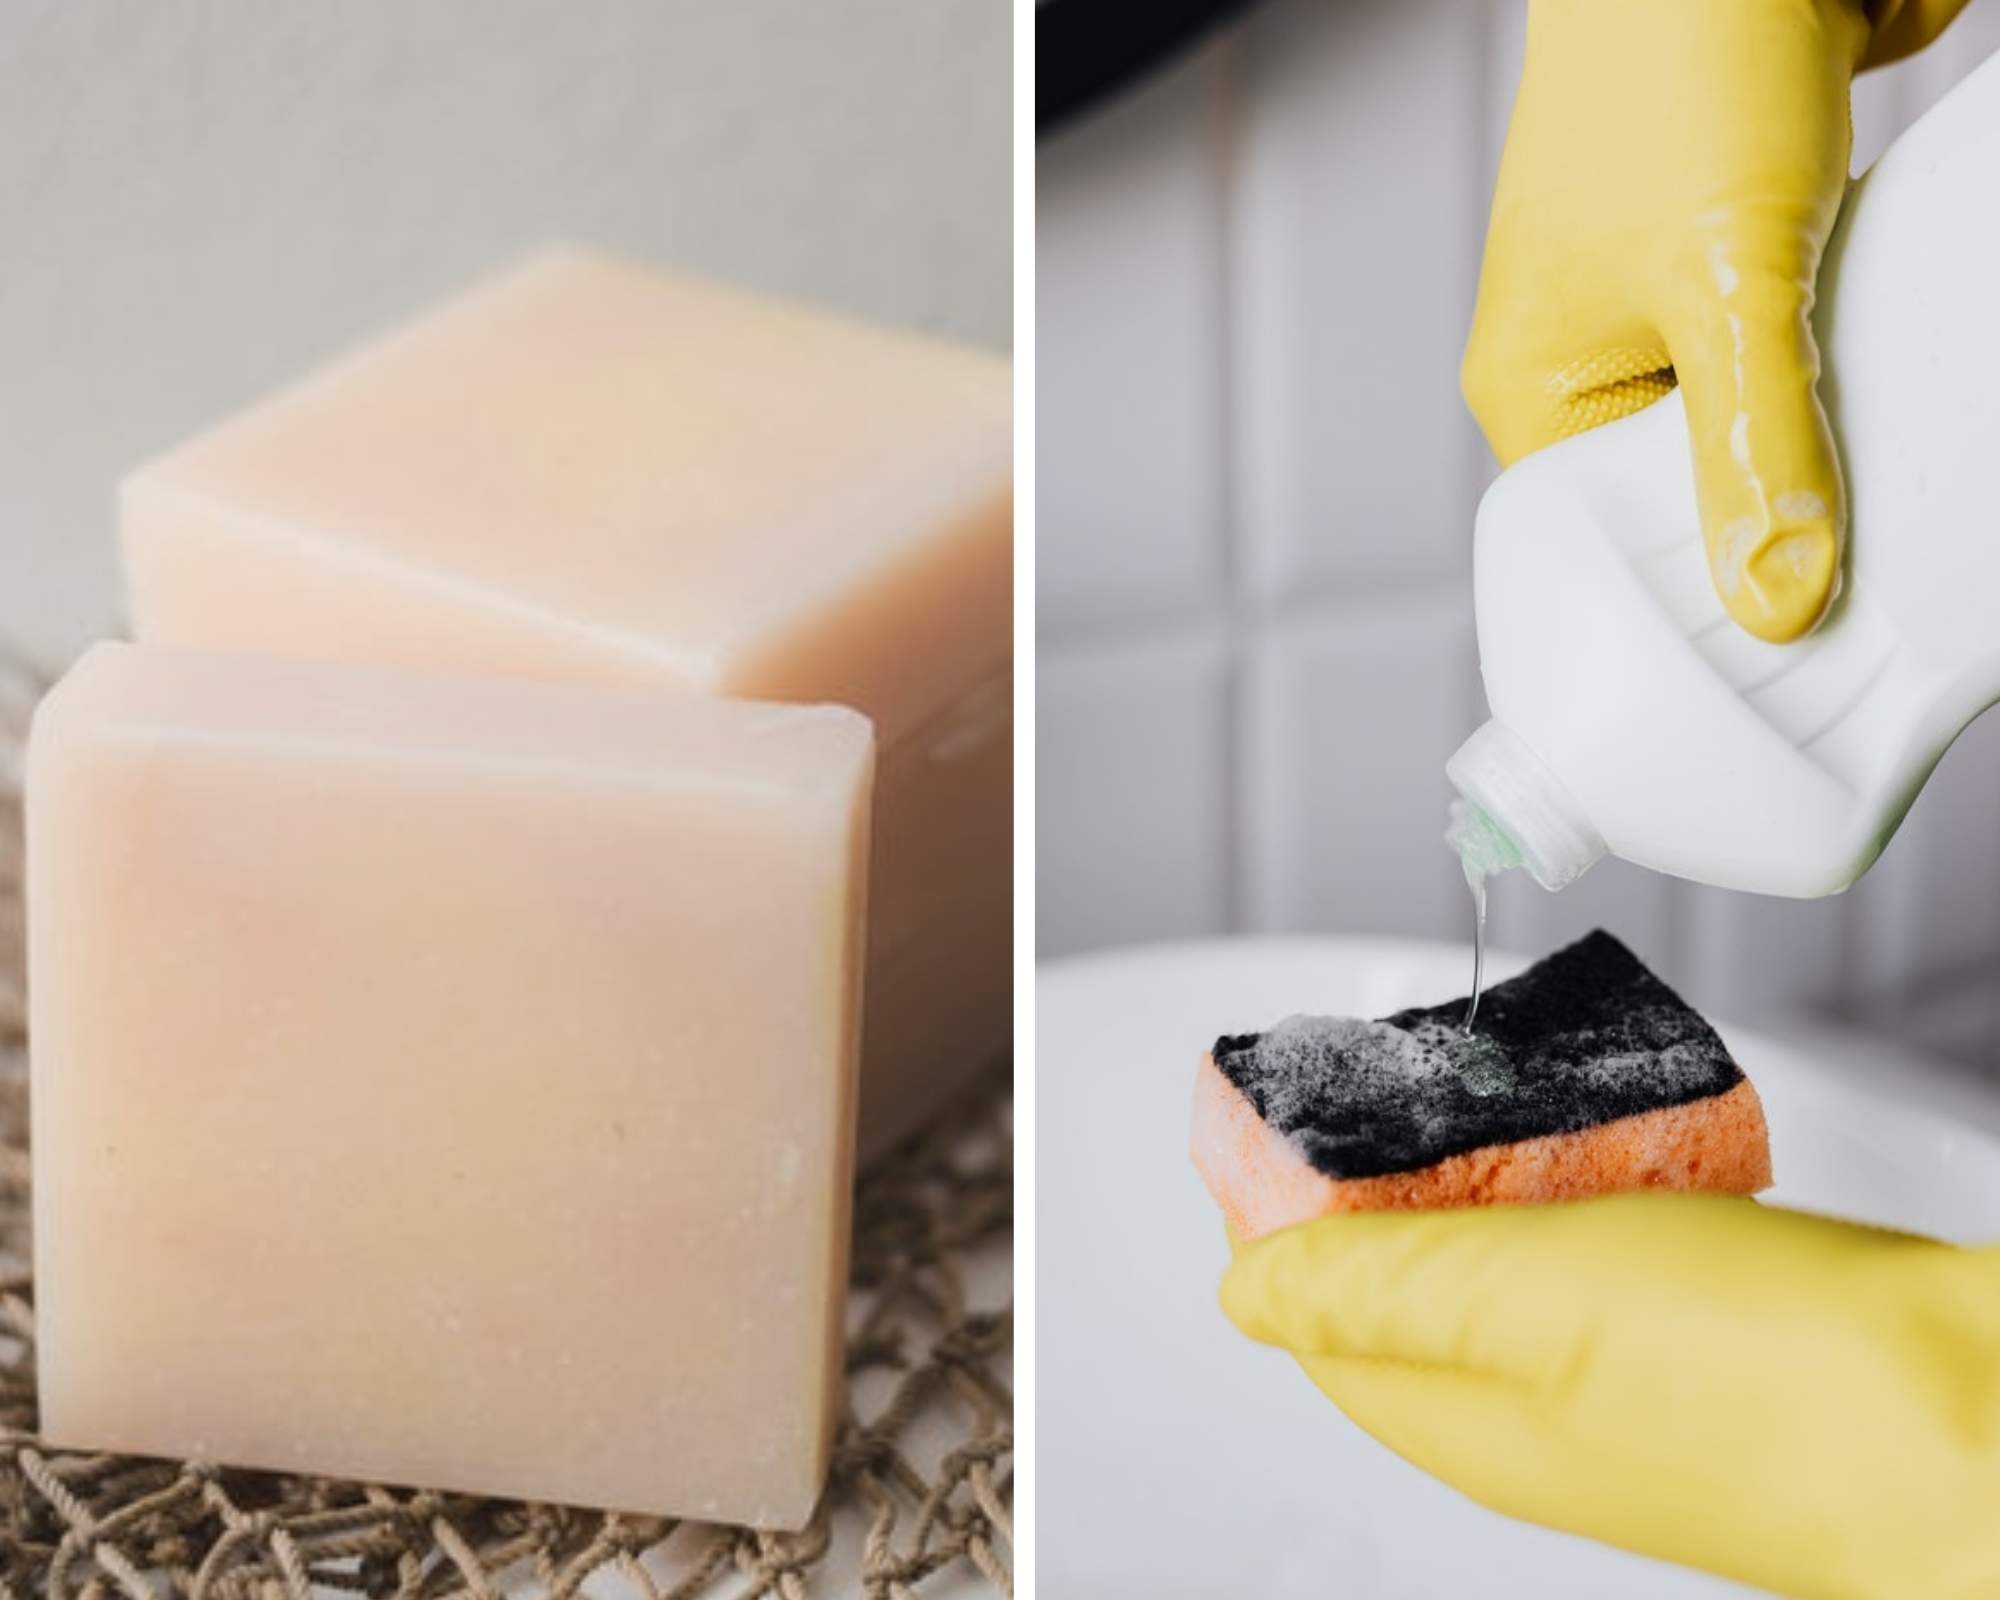 The Benefits of Using Handmade, Natural Soap via the Cold Process Method vs Commercially Made Detergents - prohibitionsoap.com